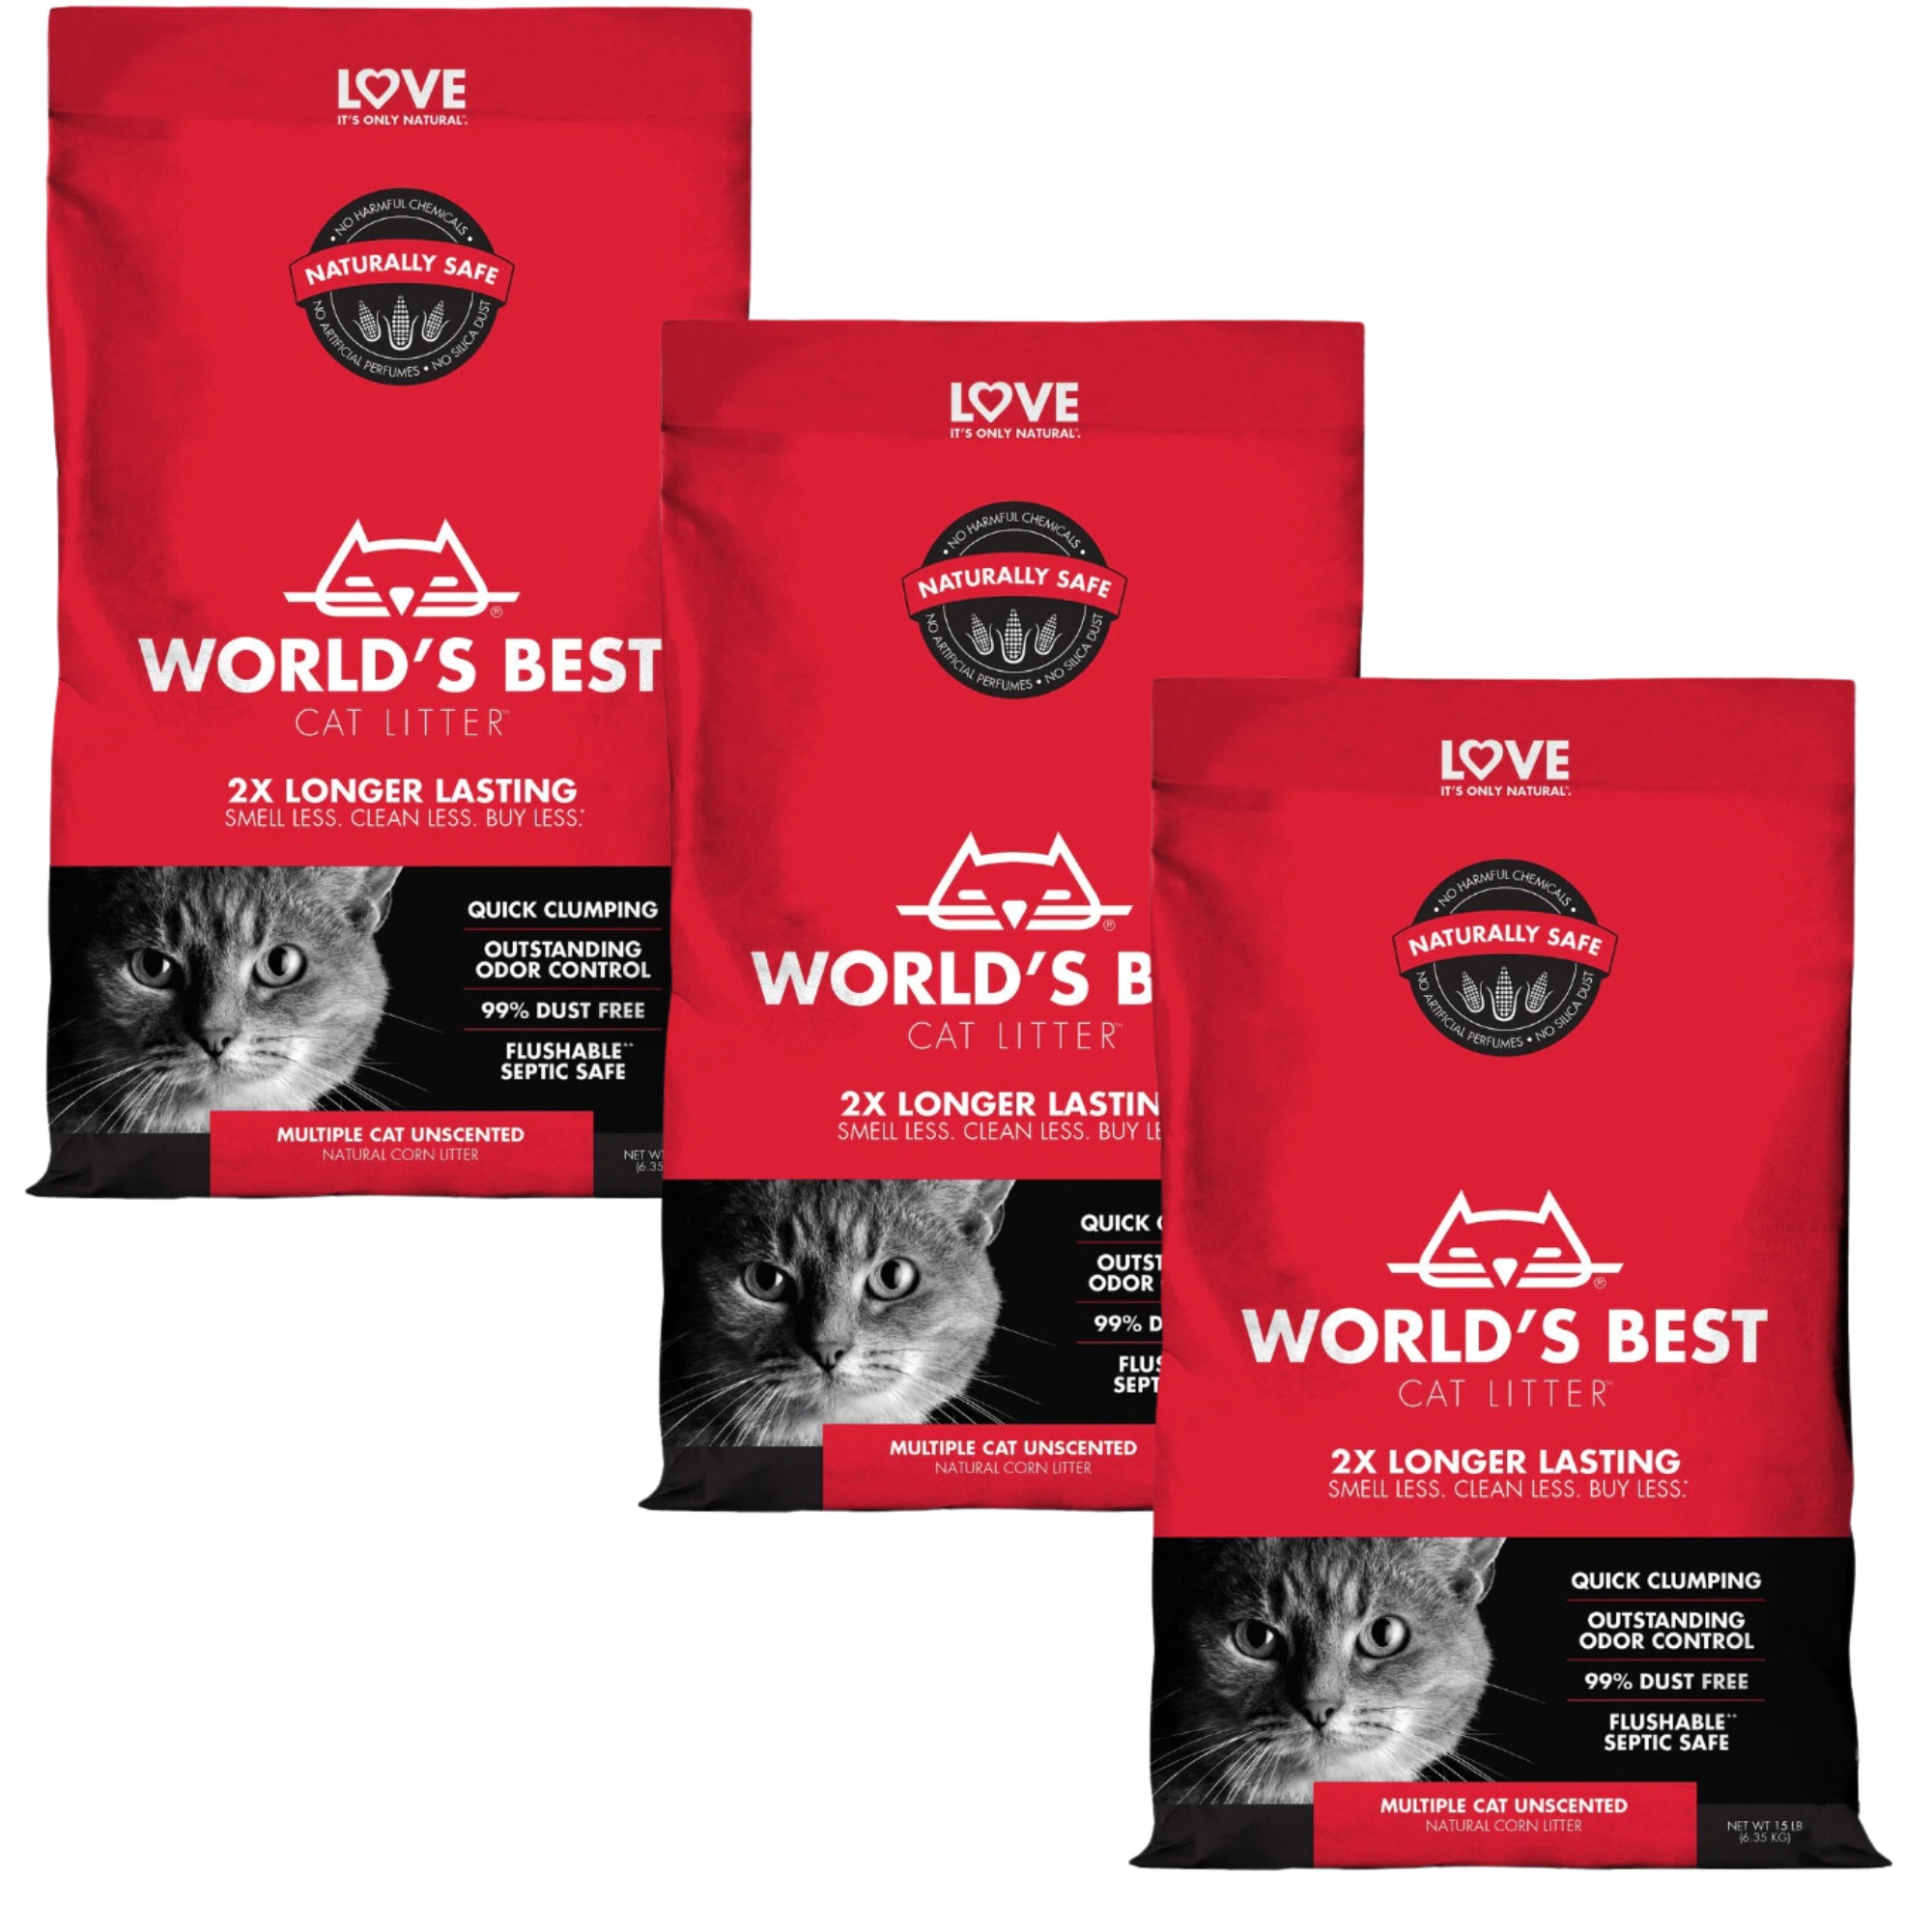 New Chewy Customers: 15-Lb World's Best Cat Litter 3 for $21 ($7 each) & More + Free Shipping